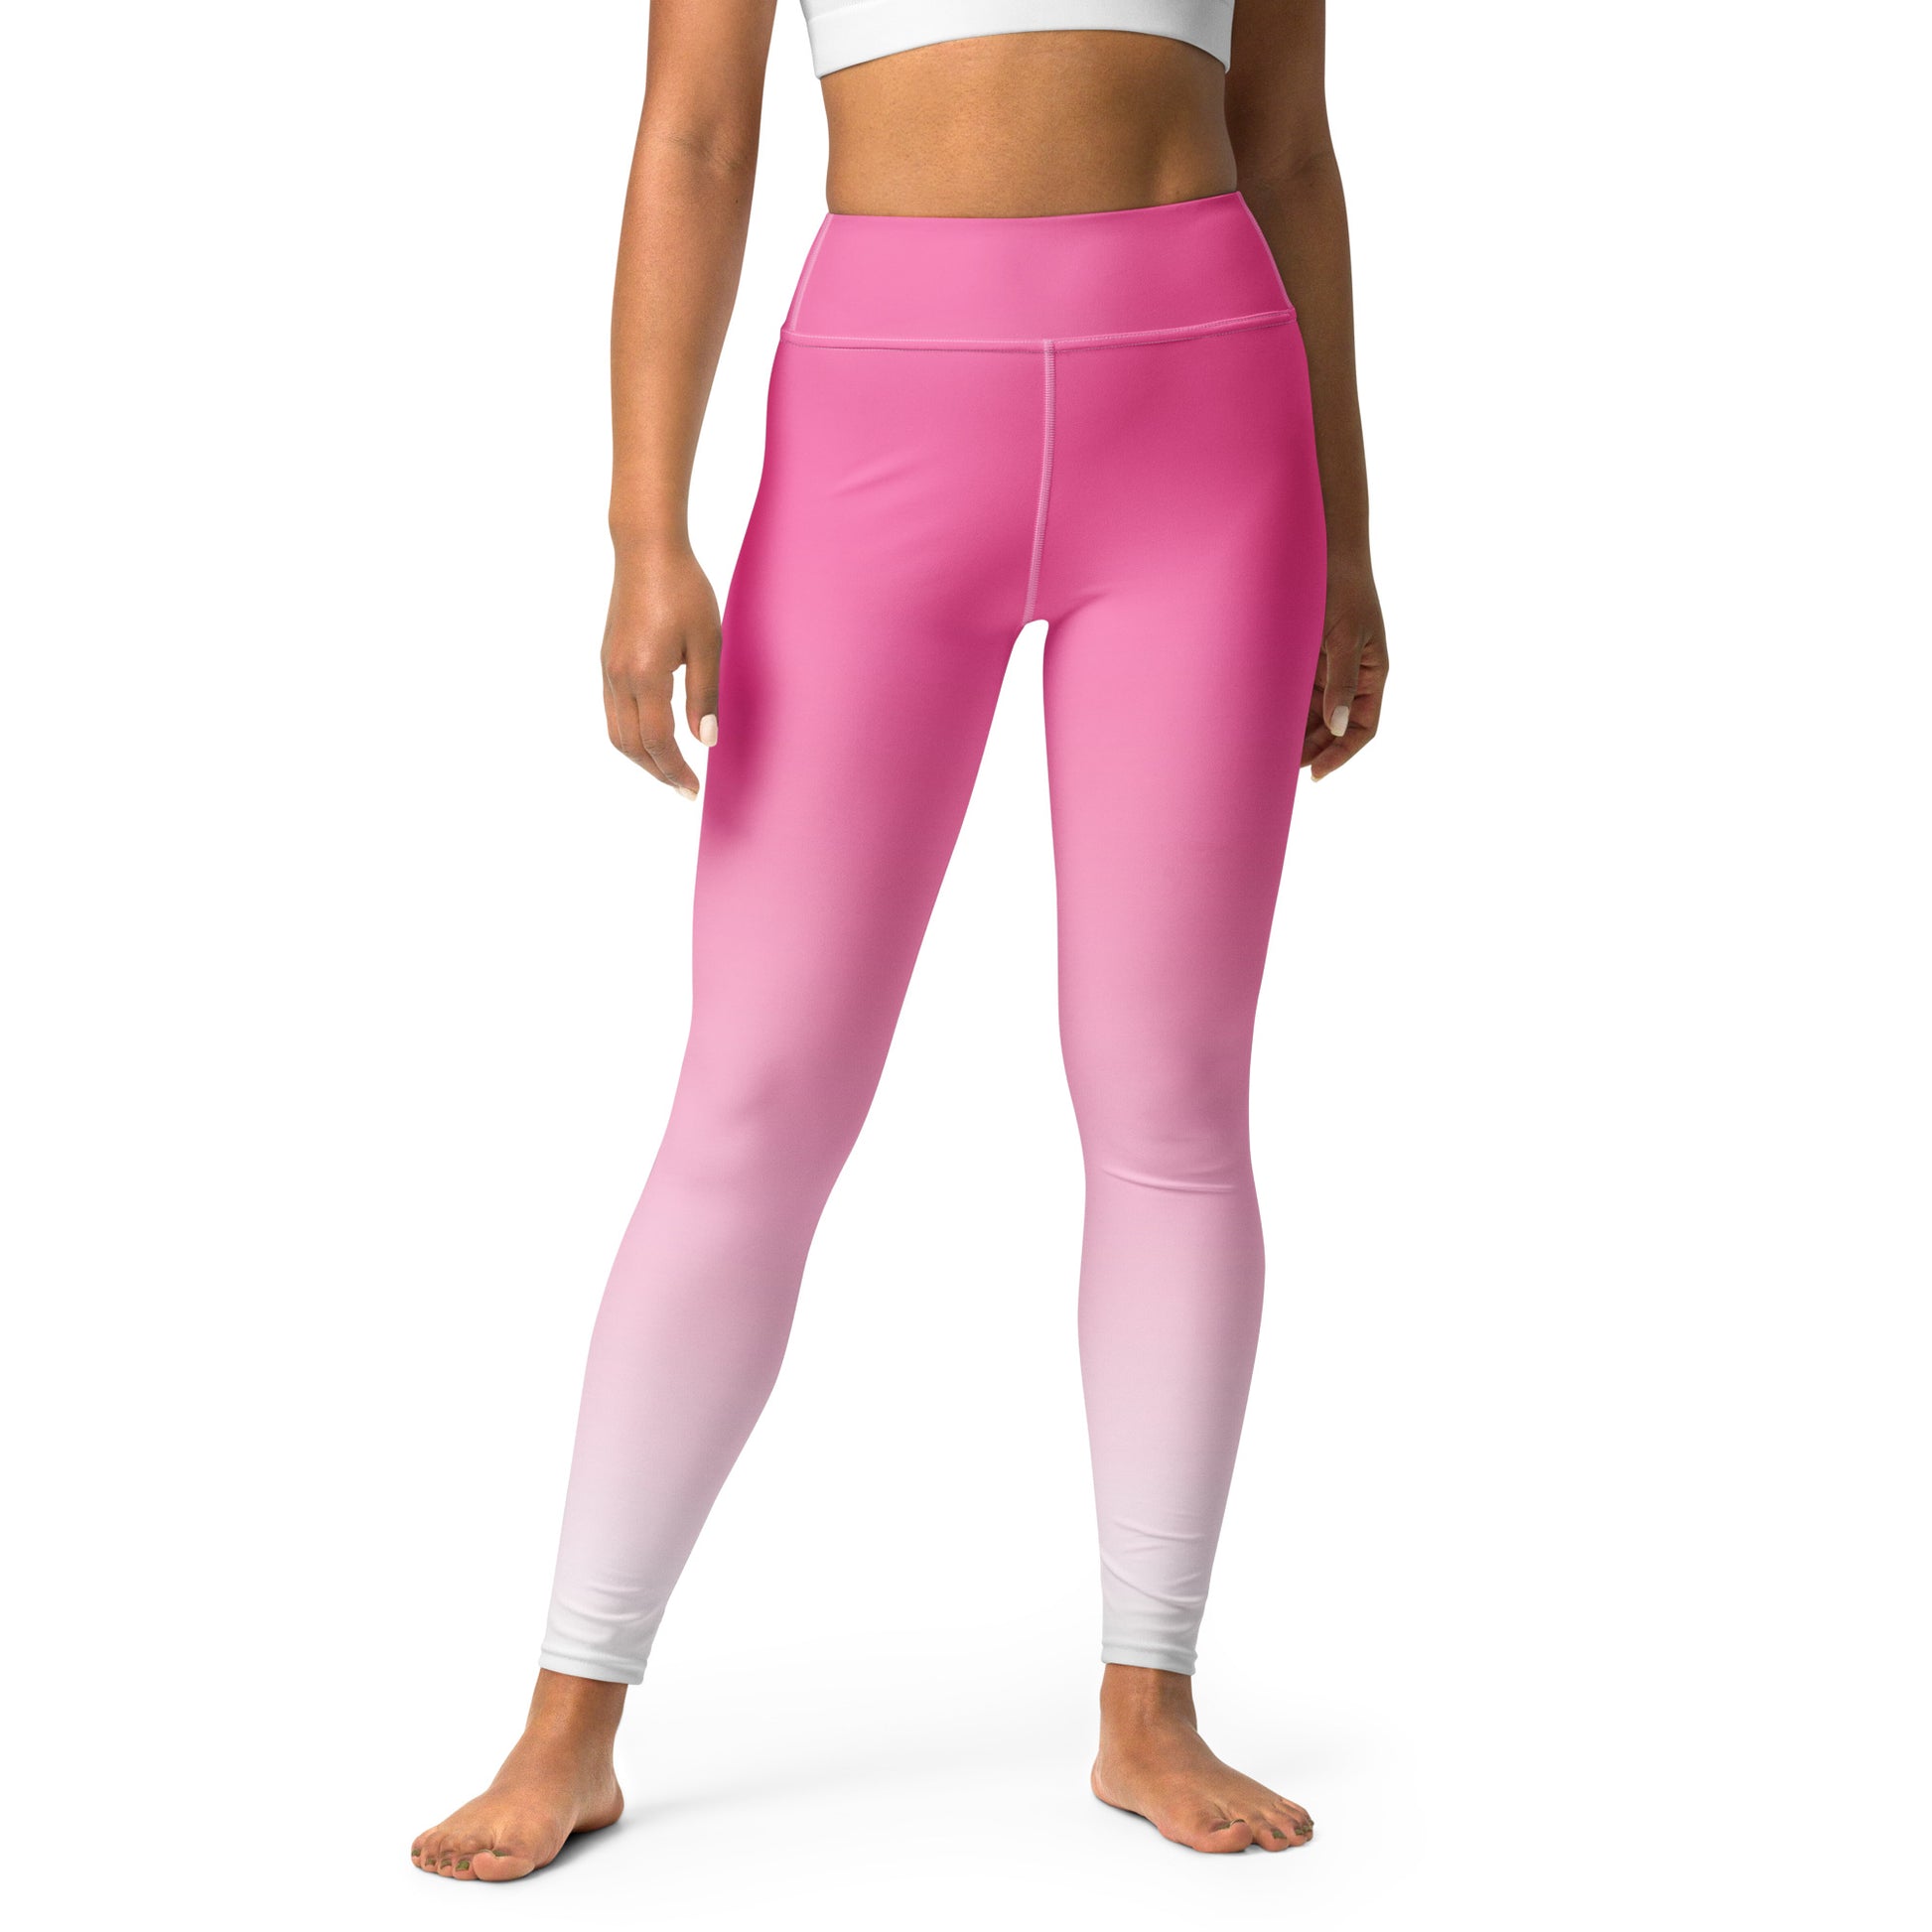 Pink and White Ombre Yoga Leggings Women, Gradient Tie Dye High